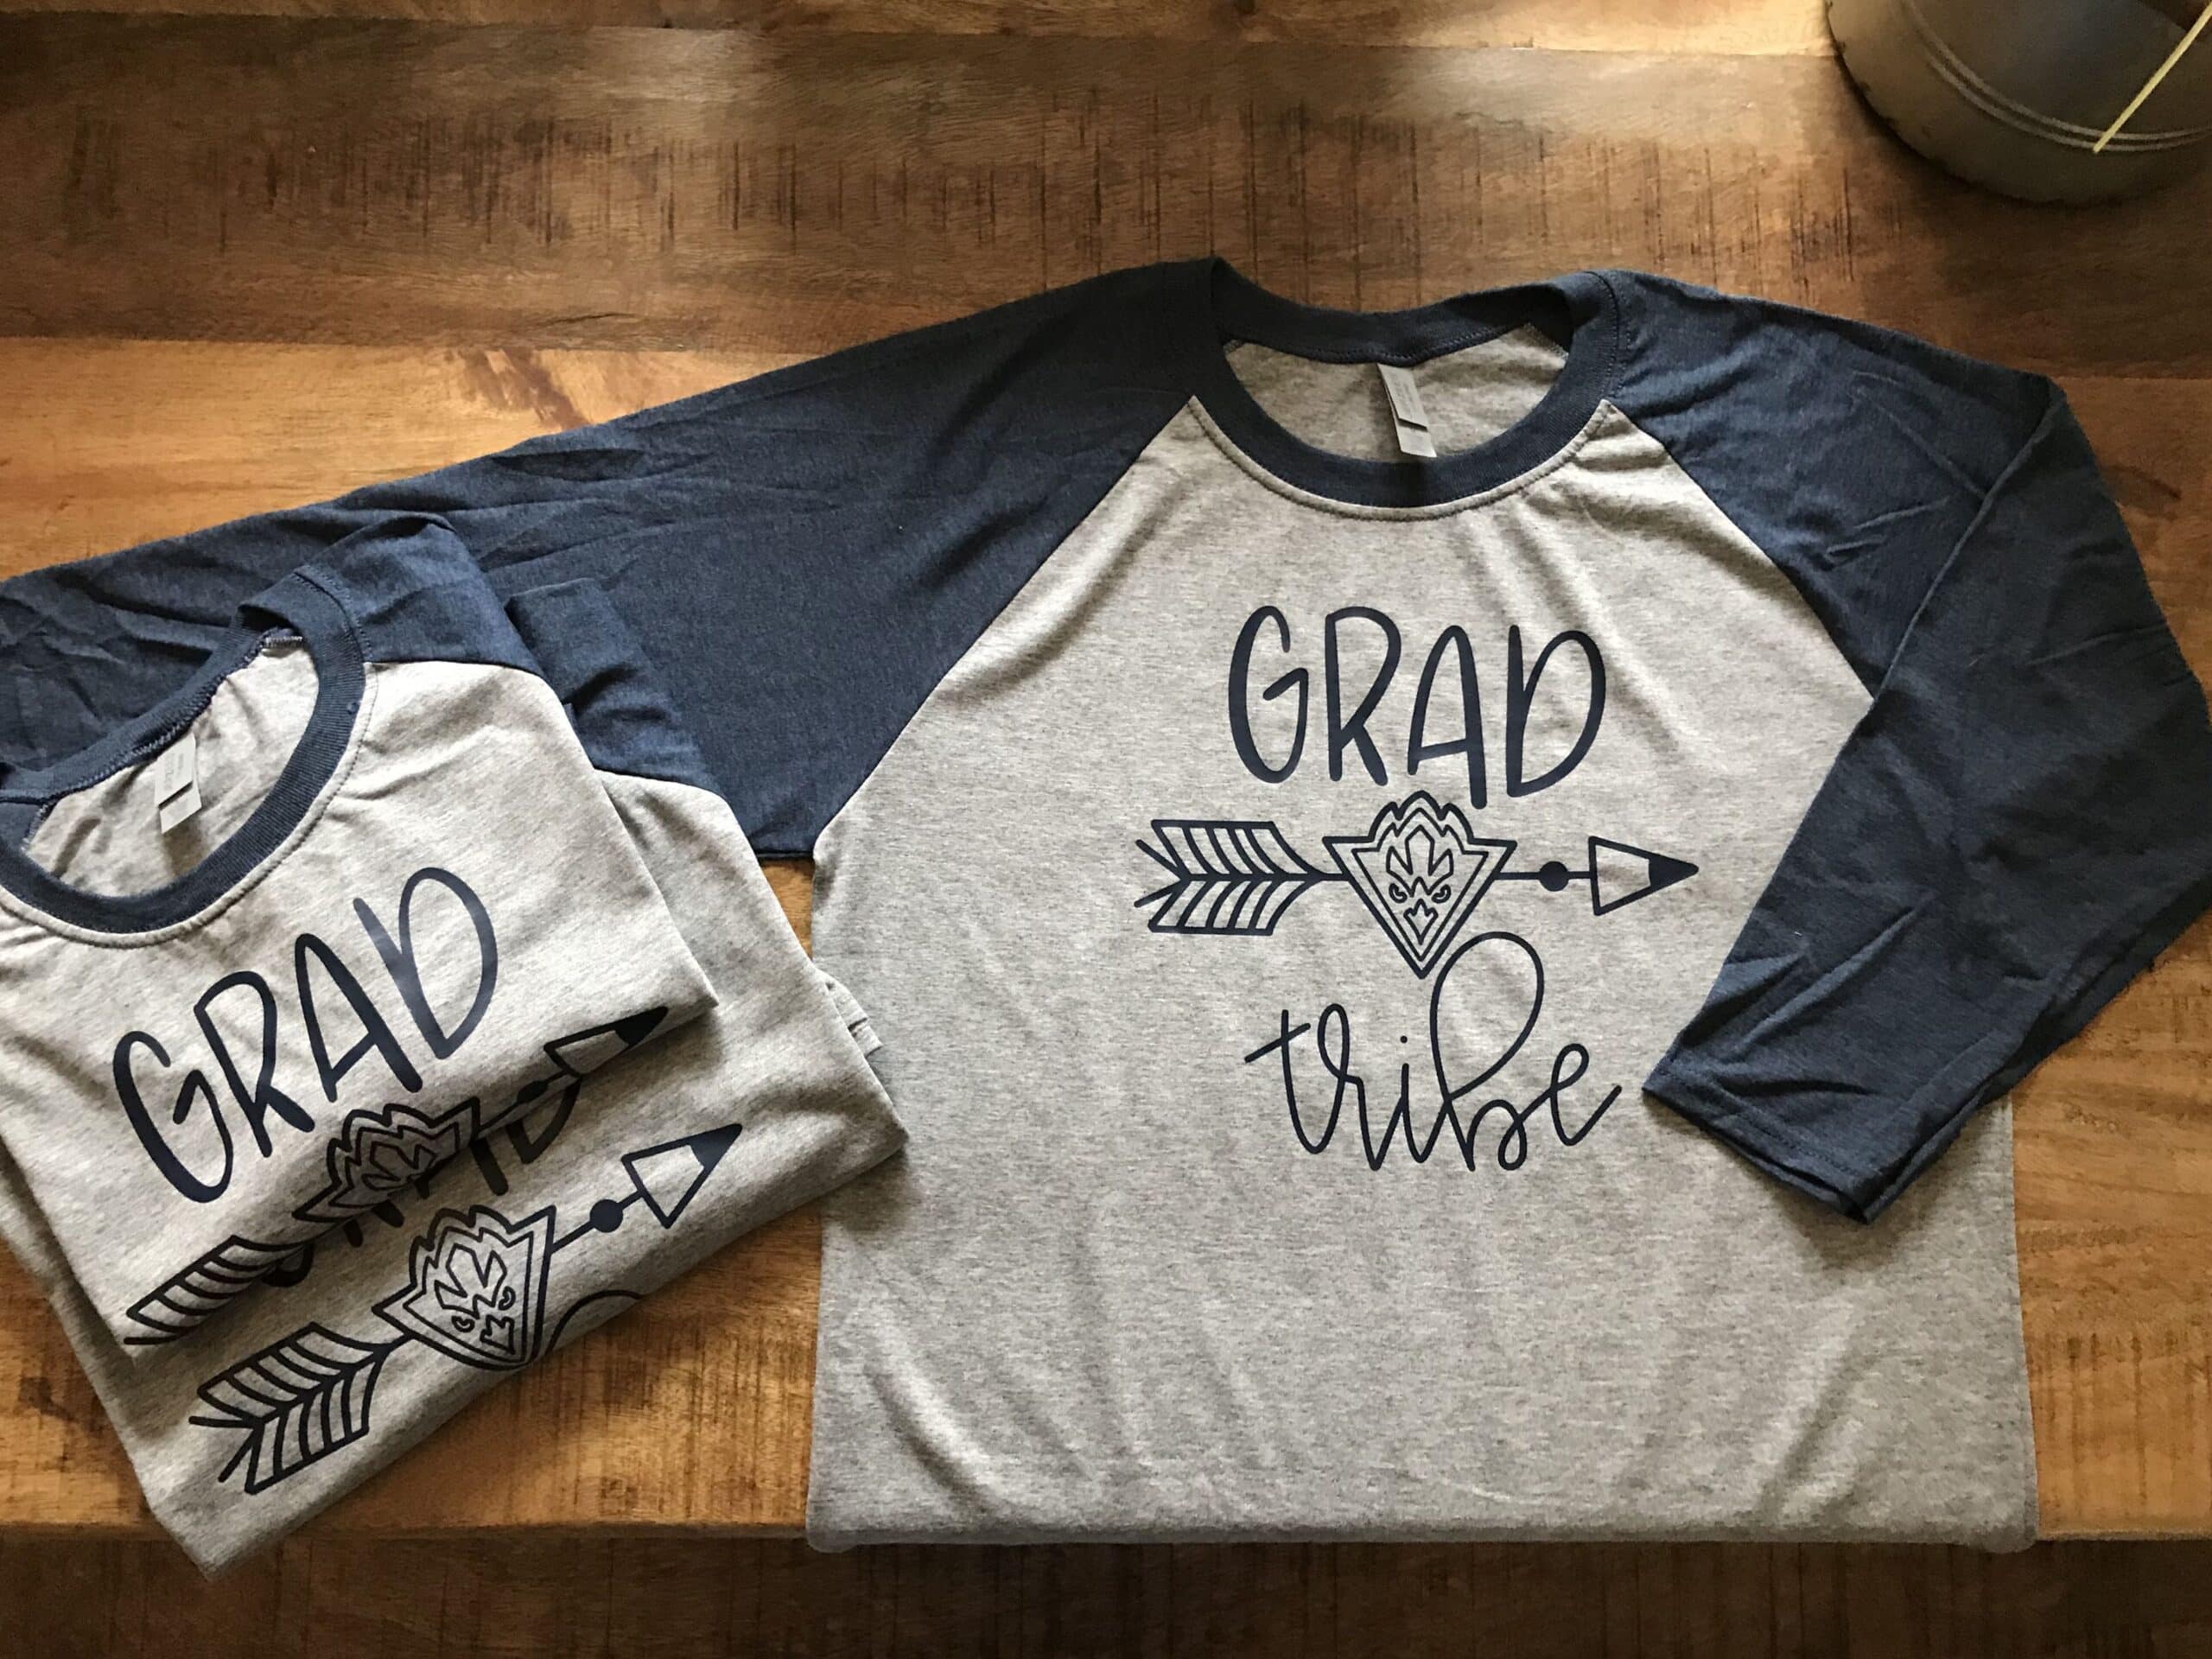 What can I make with my Cricut?